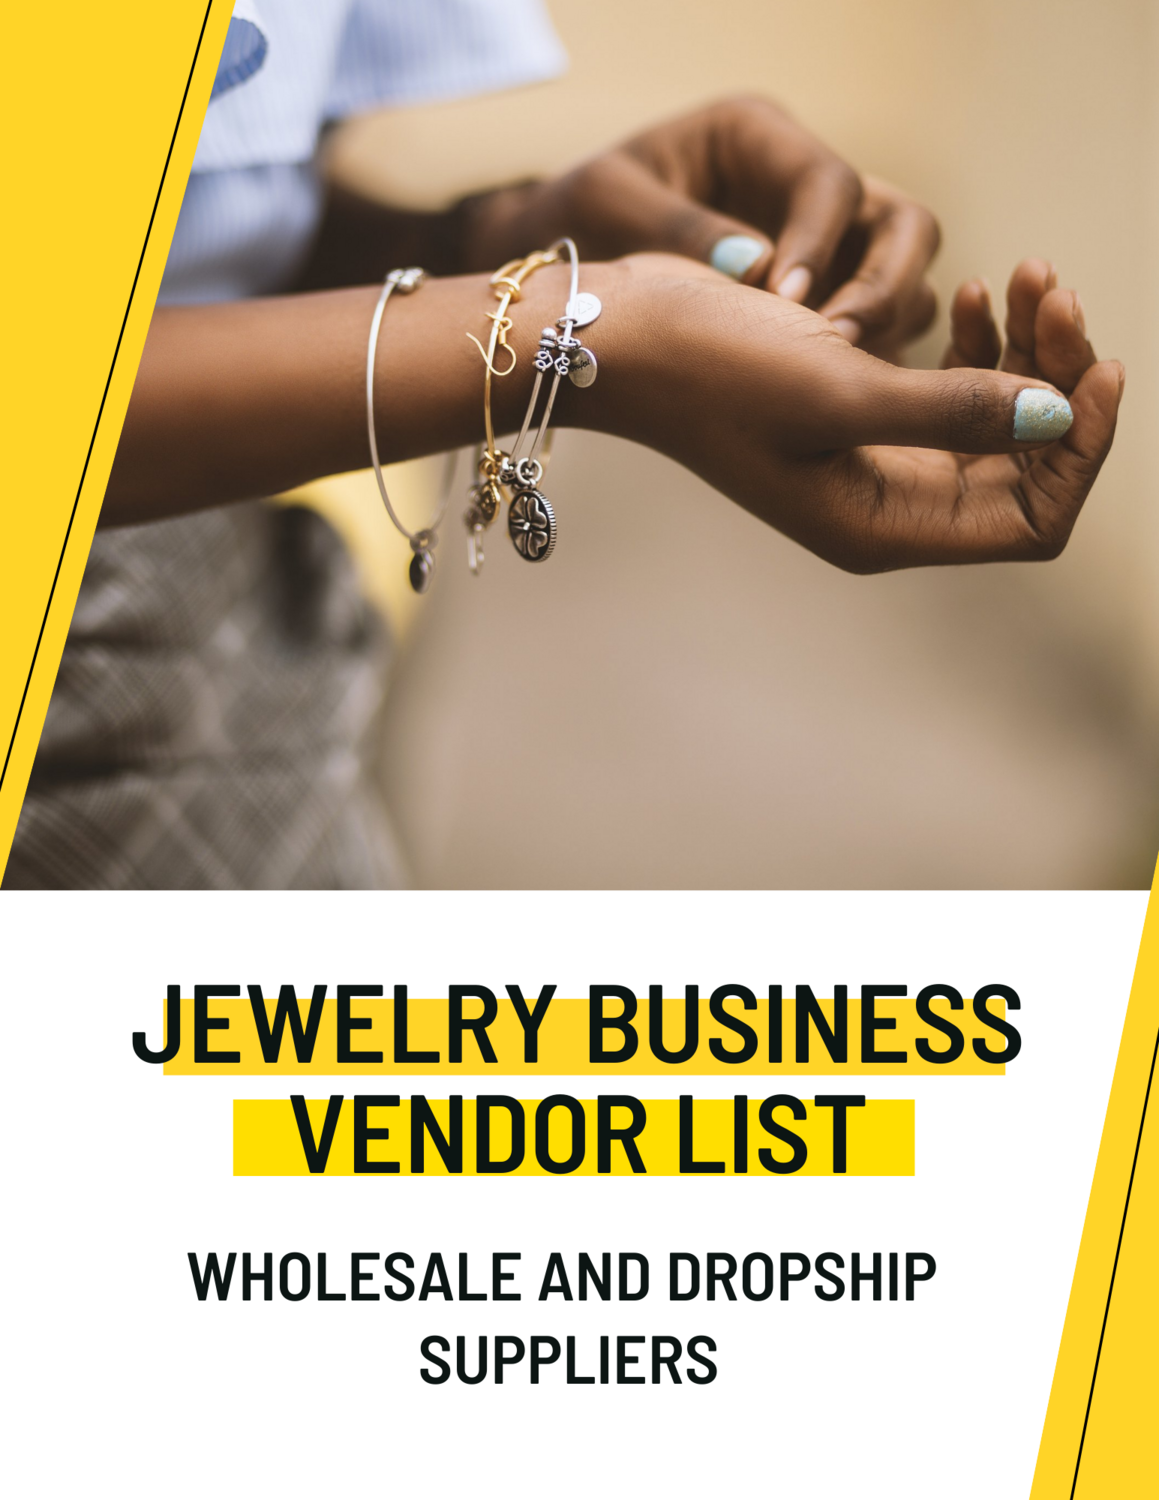 Verified Wholesale Jewelry Suppliers - Drop shipping Jewelry Vendor List